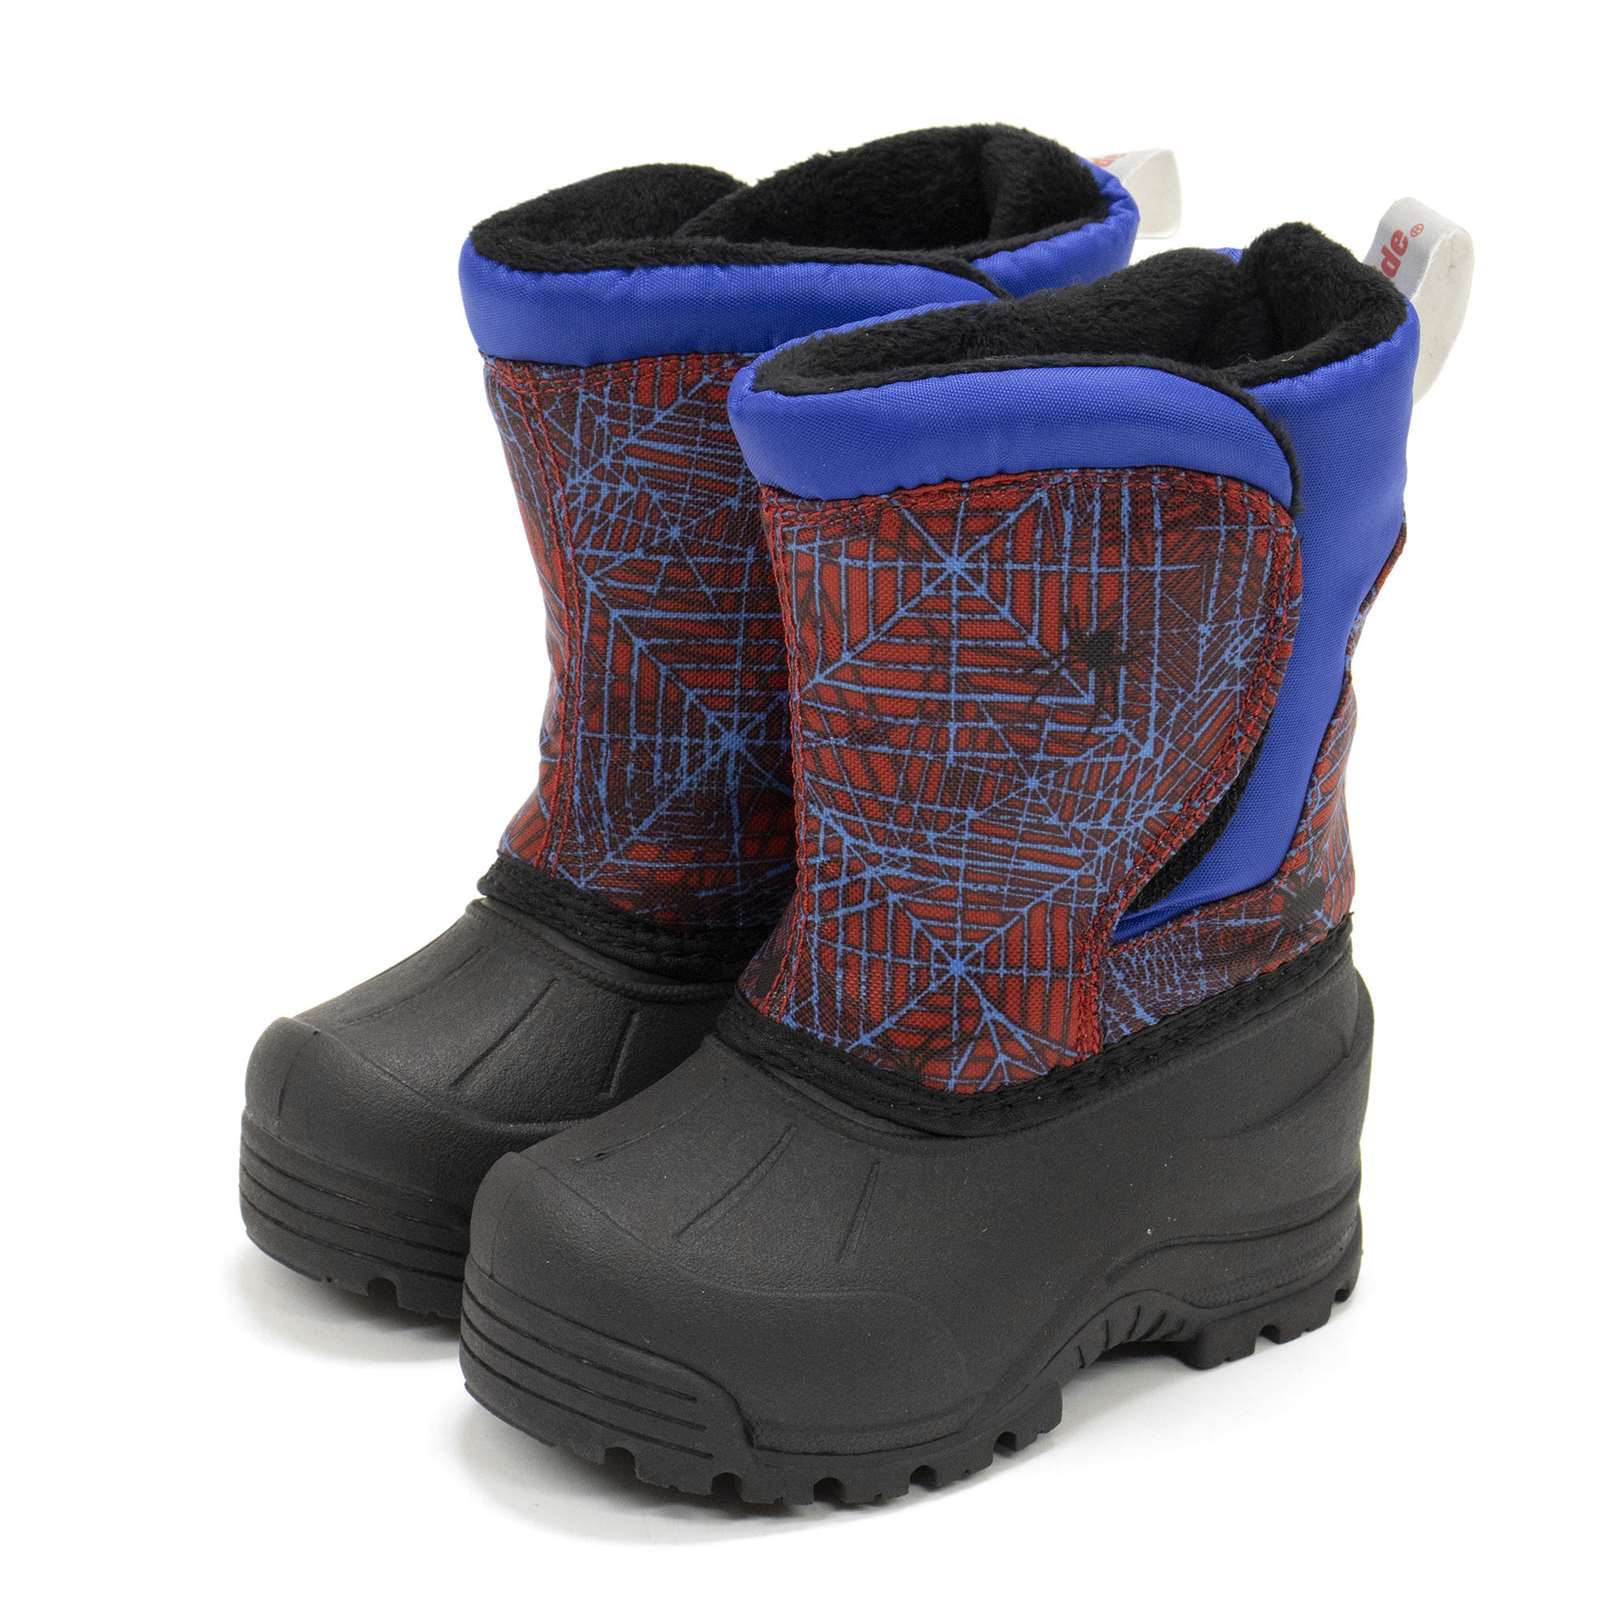 Northside Toddler Snoqualmie Winter Boots